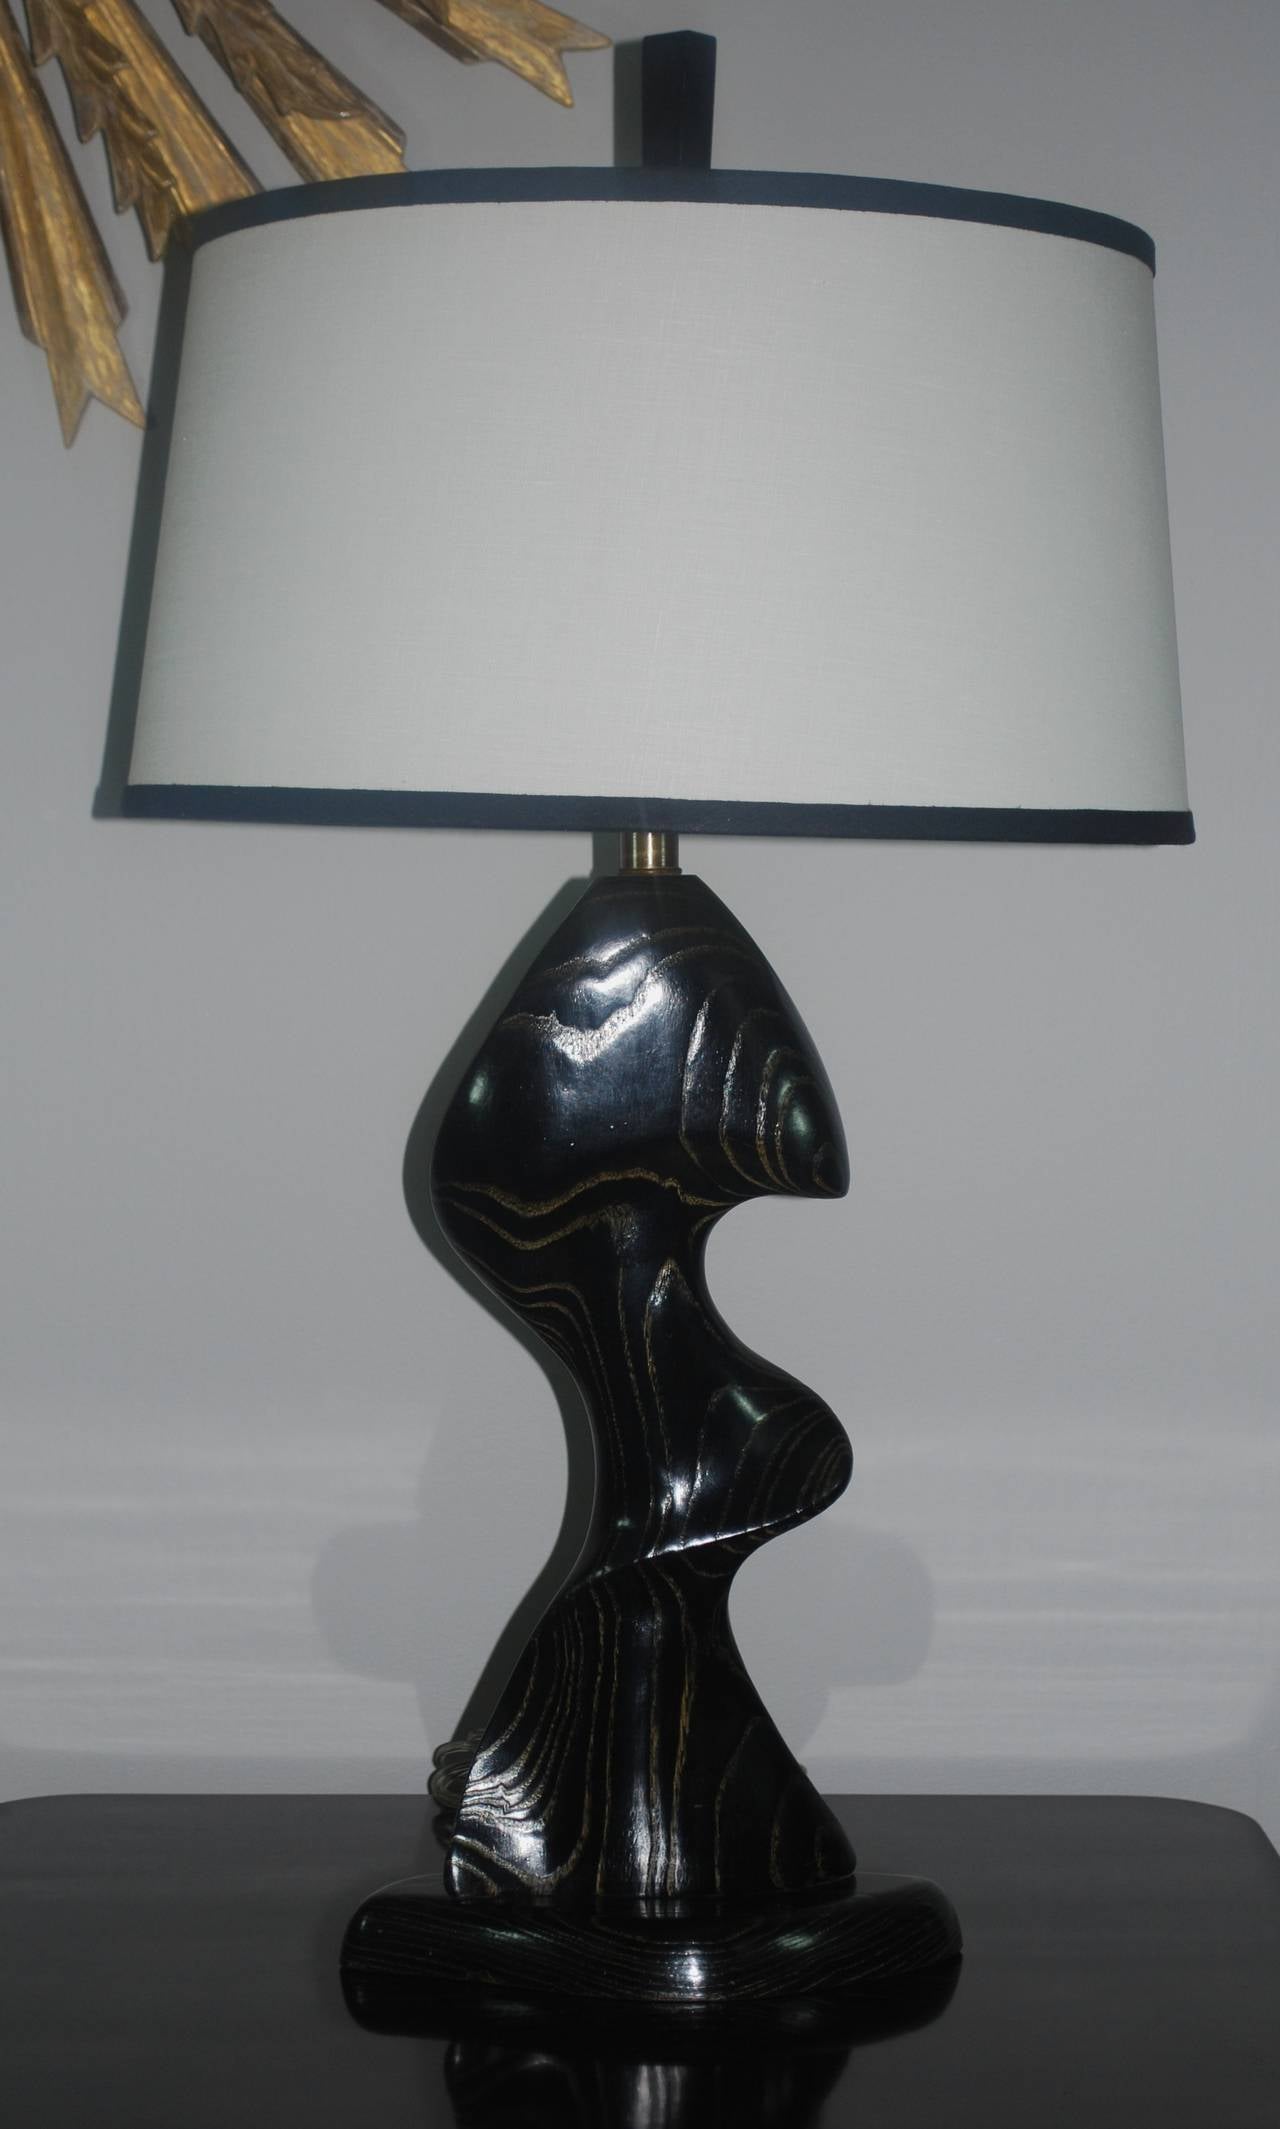 Impressively sculptural, black cerused table lamp. New linen shade with black contour. Newly rewired, circa 1960s.